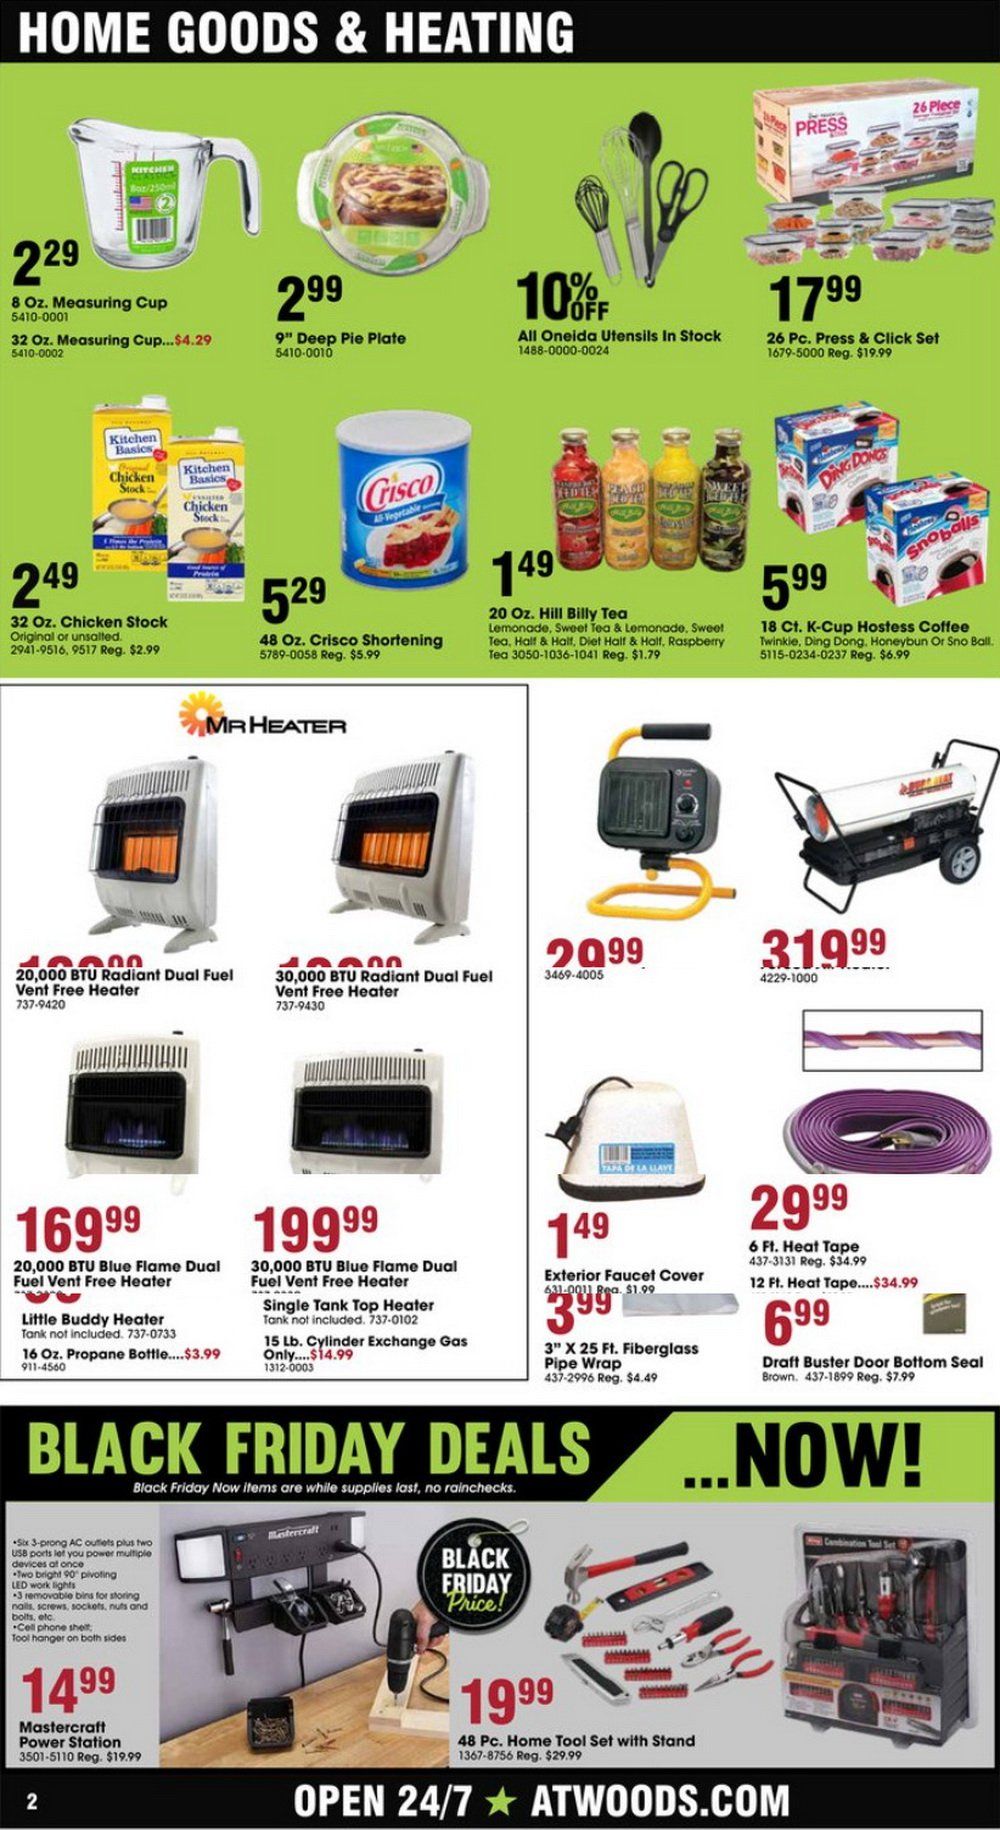 Atwoods Black Friday Ad Nov 11 – Nov 21, 2020 - What Stores Have Their Black Friday Ad Out